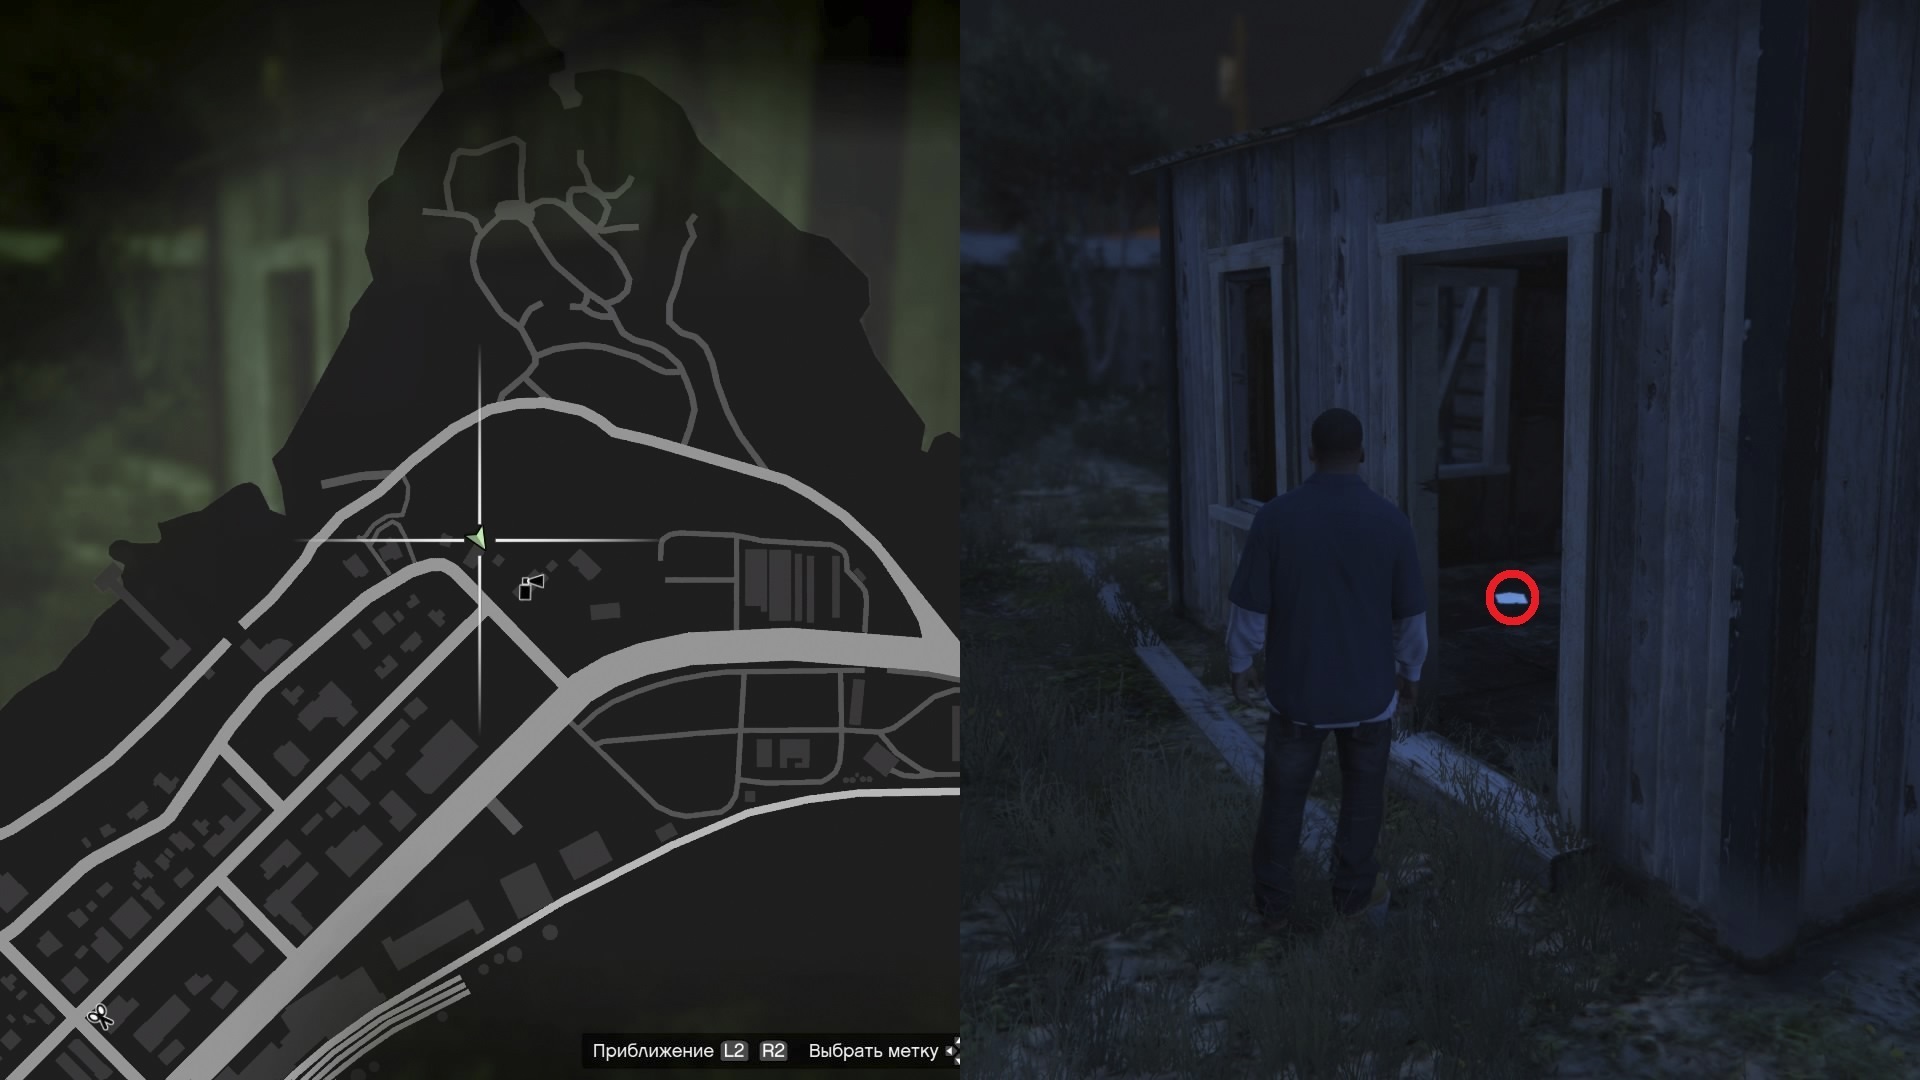 Grand Theft Auto V Completion Guide - Playthrough - Collect 50 scraps of a letter, 2 part - 2F428E4